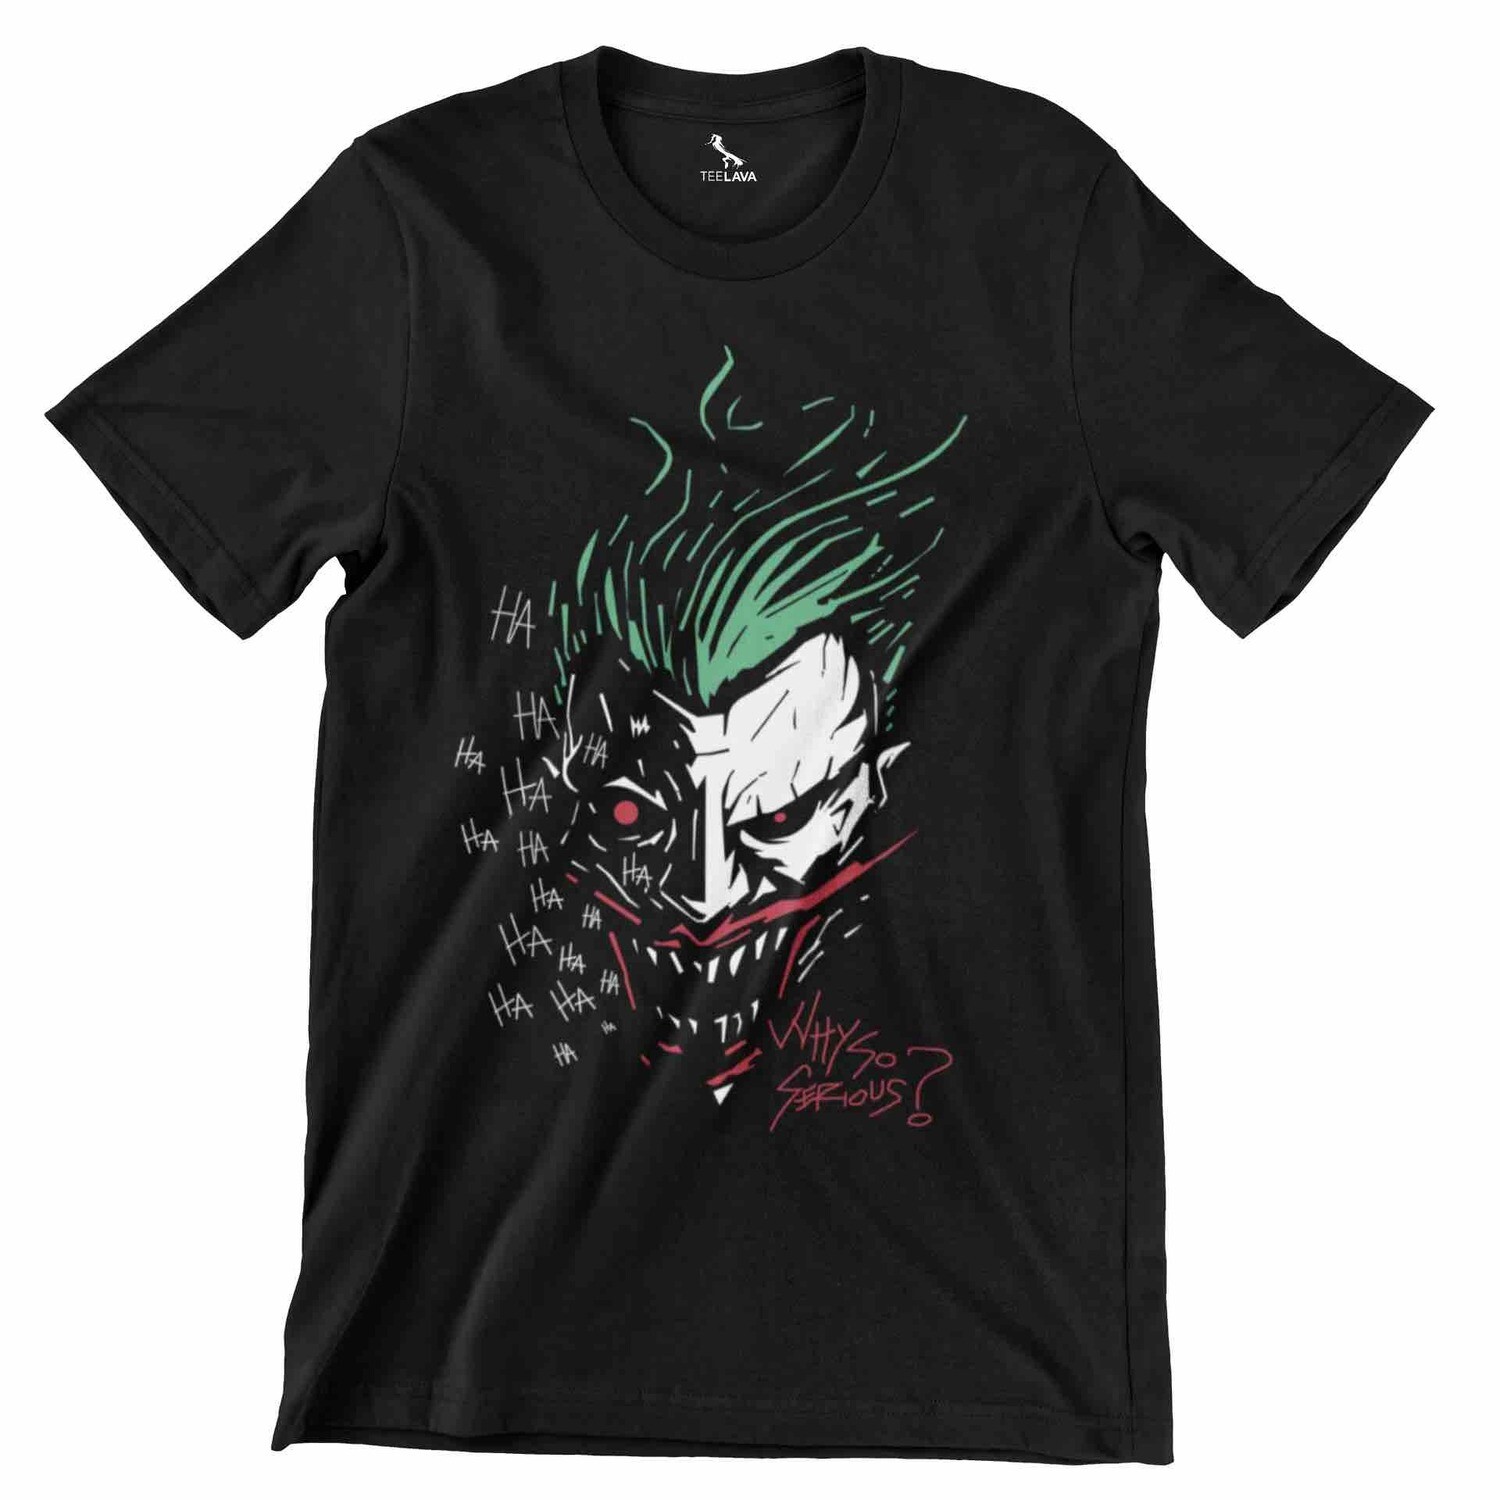 TShirt-People Joker Why so Serious T-shirt pour homme